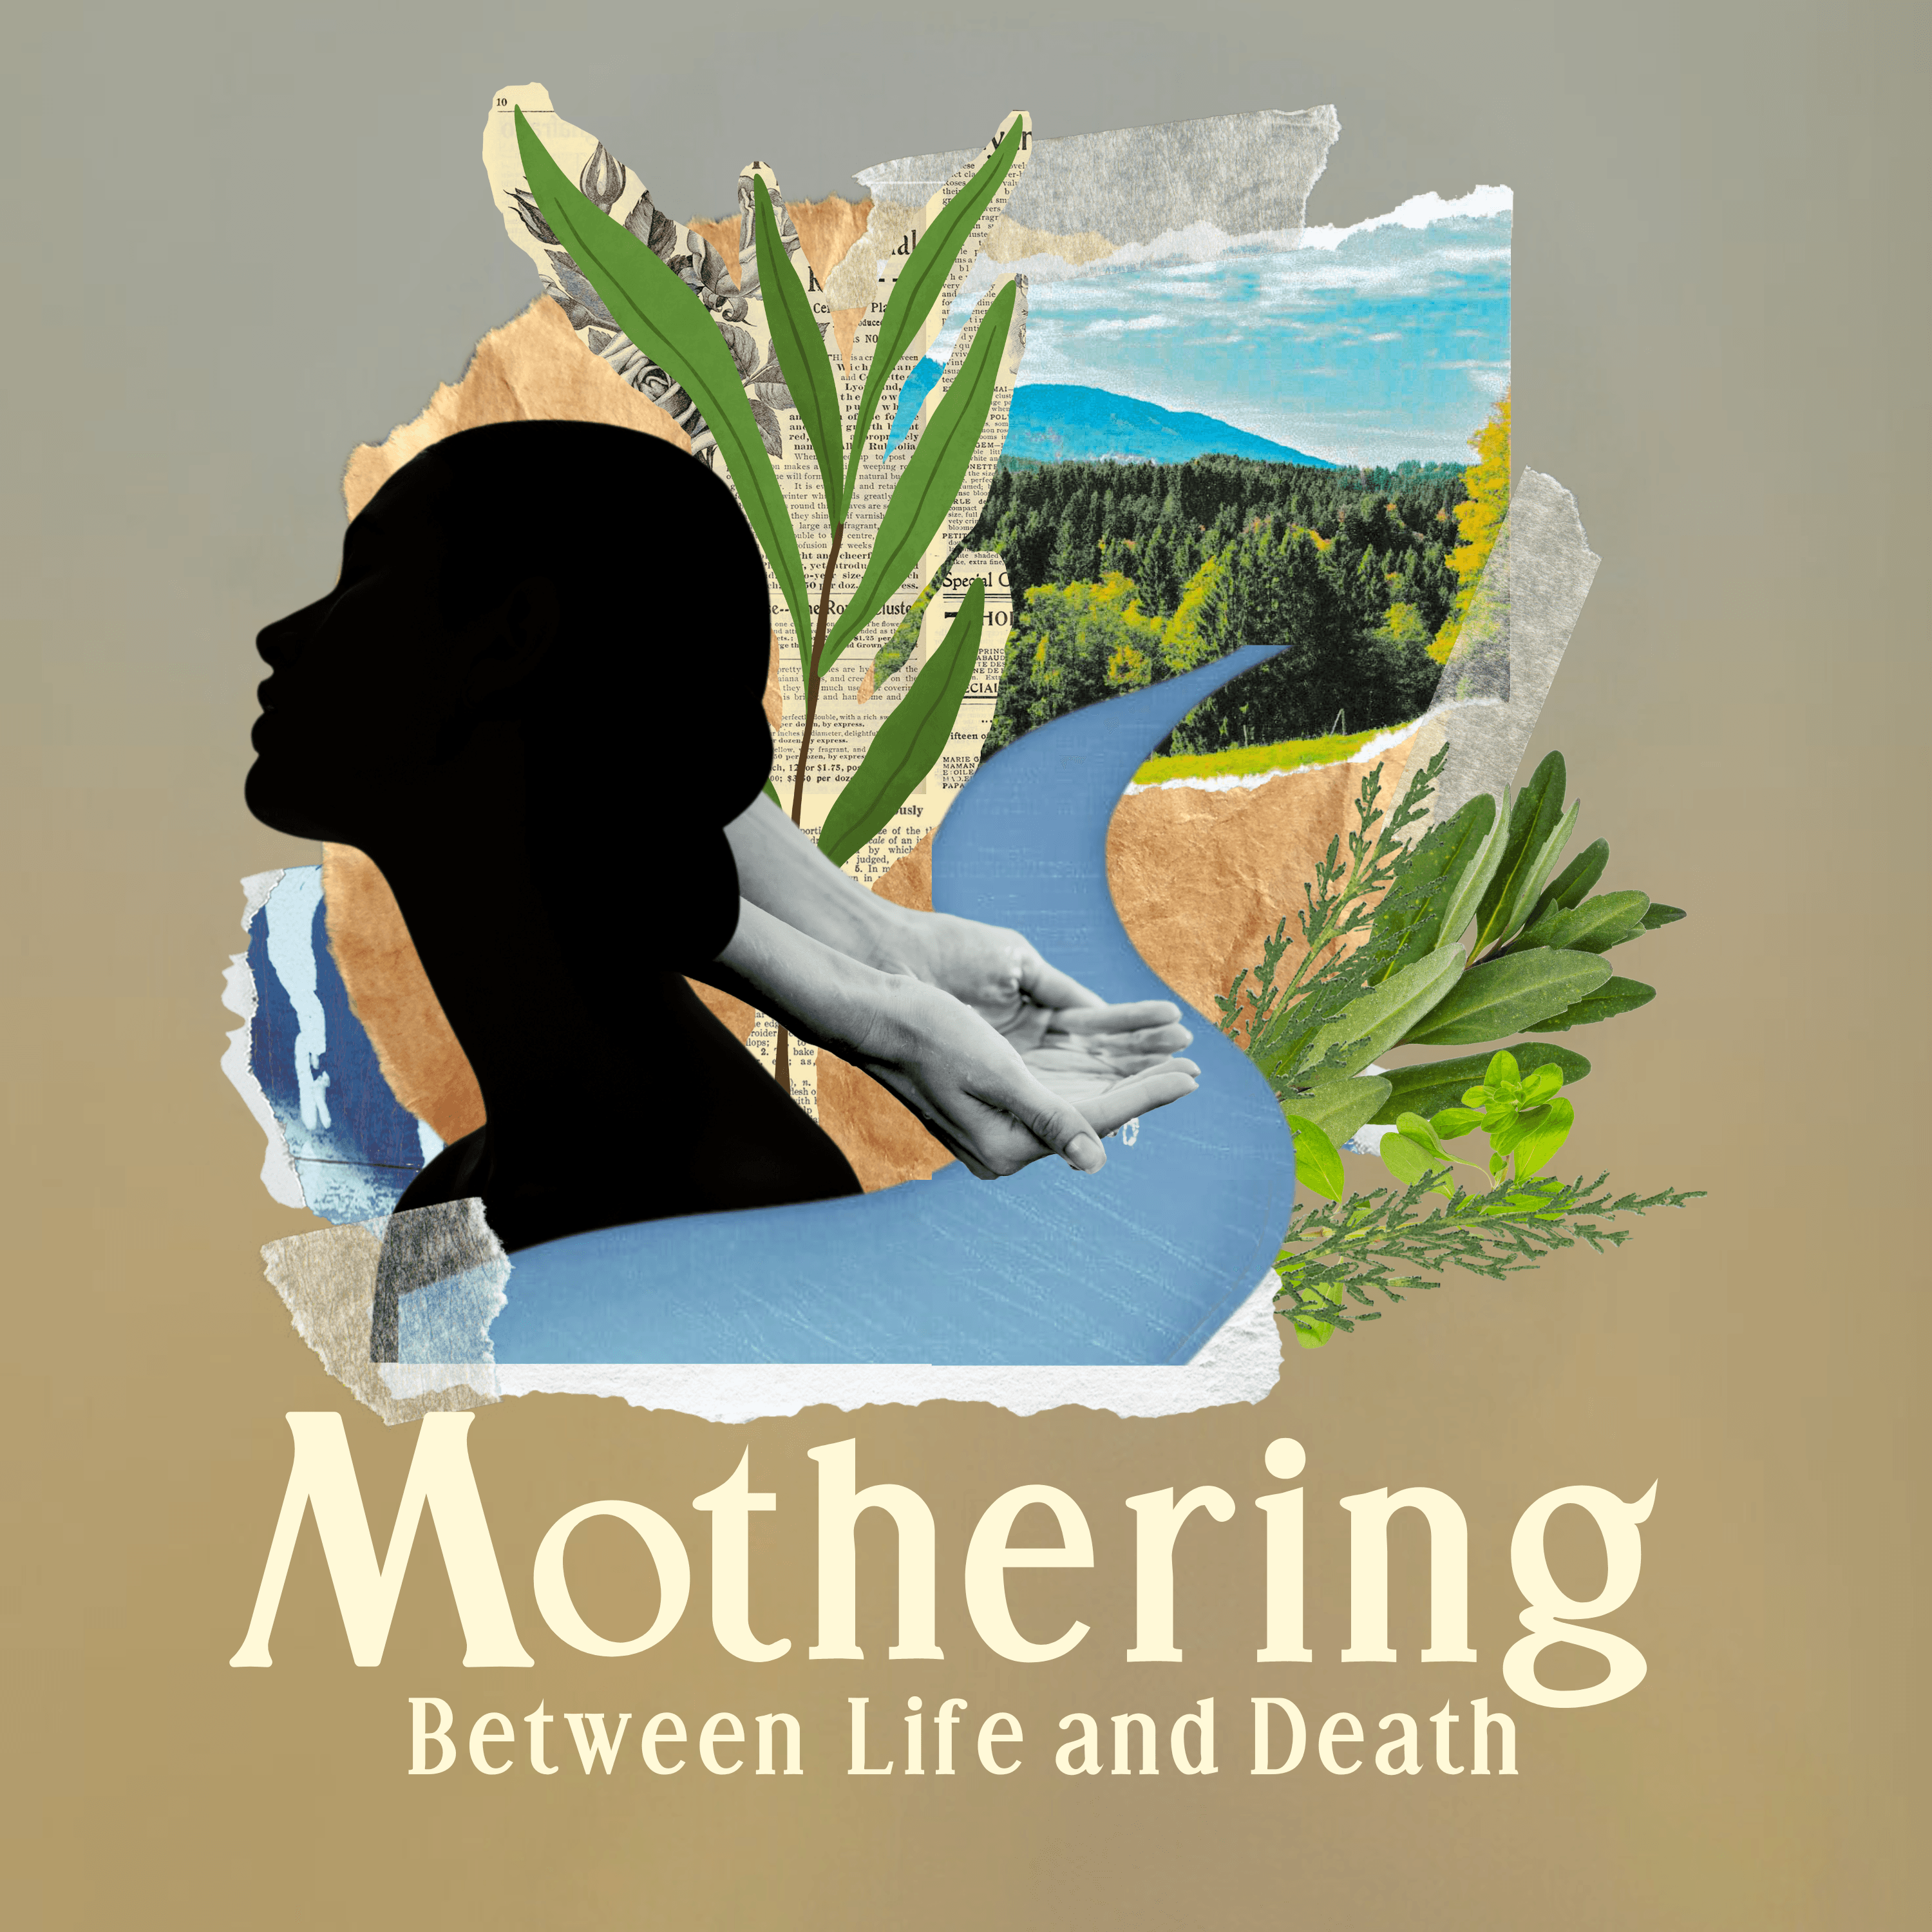 Thumbnail for "Mothering between Life and Death (Katherine)".